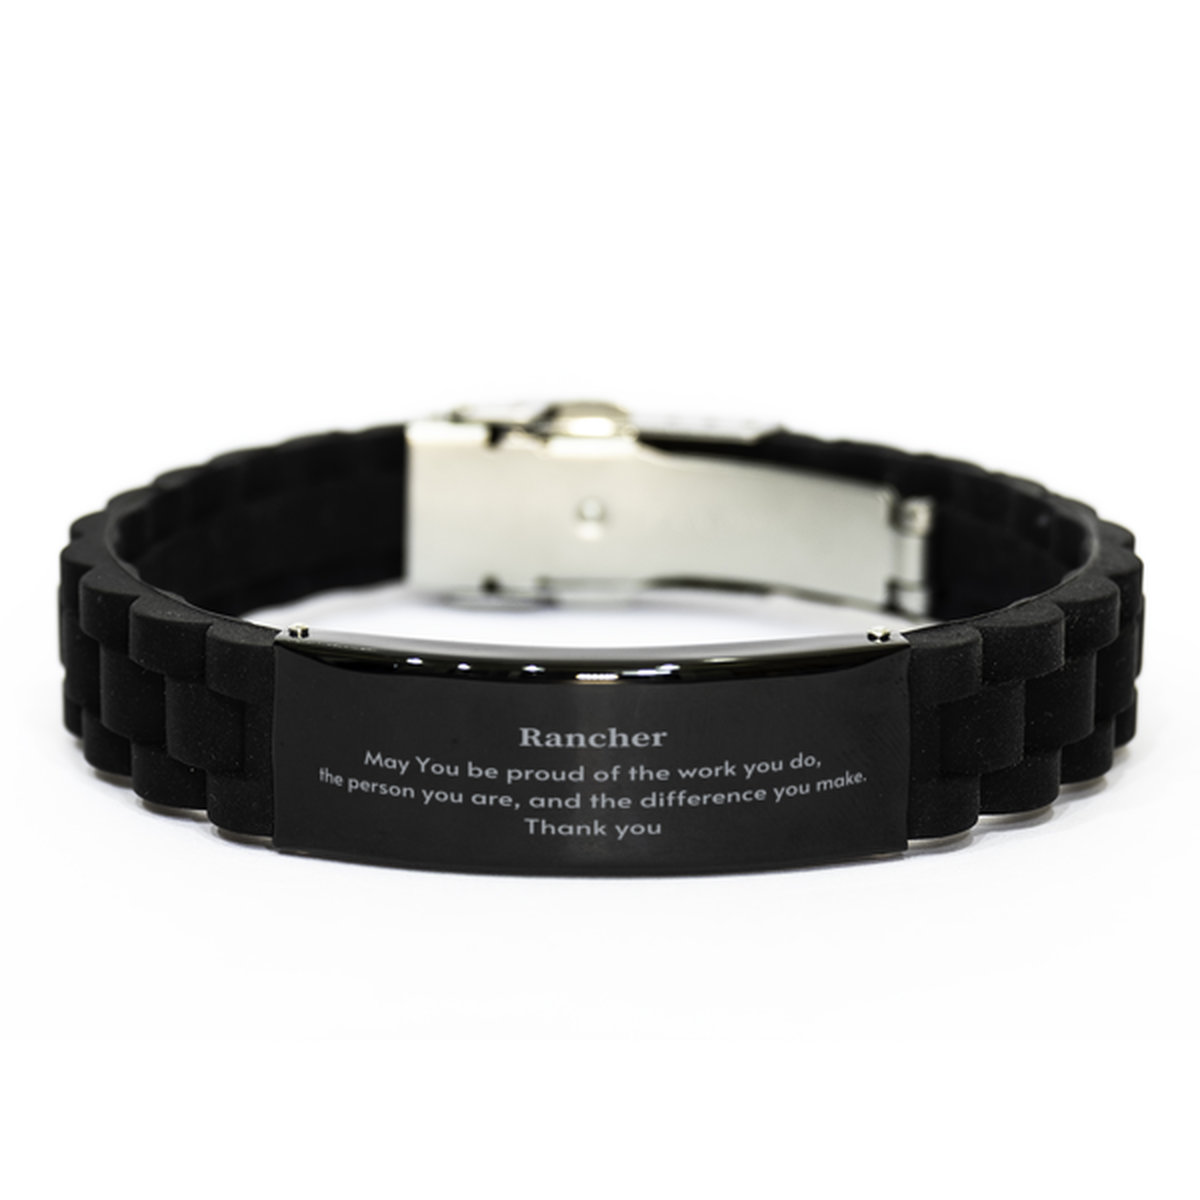 Heartwarming Black Glidelock Clasp Bracelet Retirement Coworkers Gifts for Rancher, Rancher May You be proud of the work you do, the person you are Gifts for Boss Men Women Friends